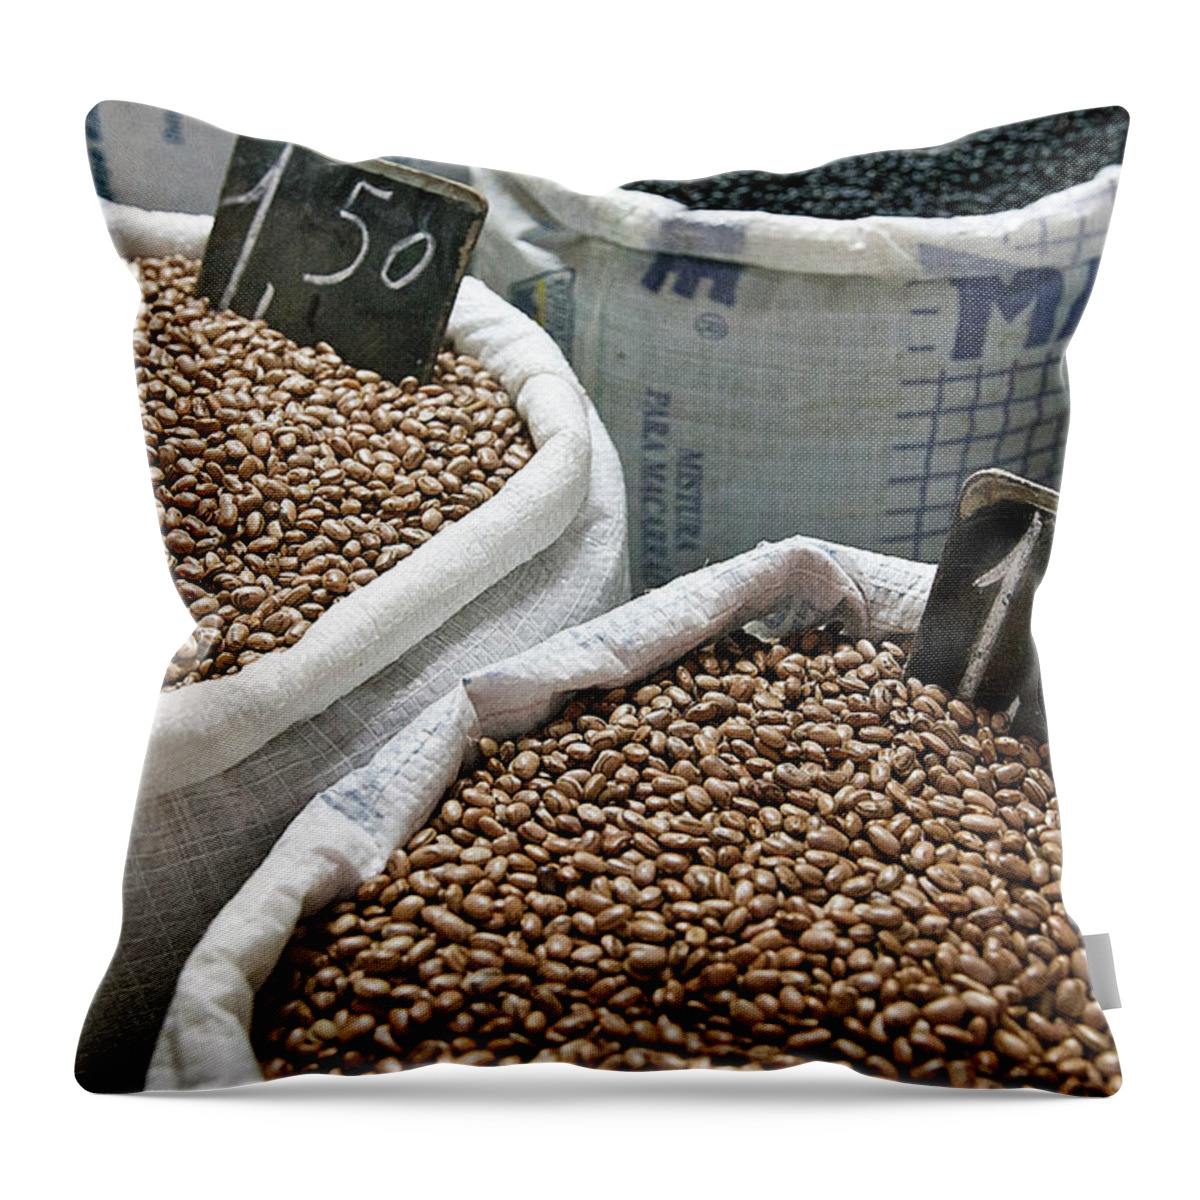 Bahia State Throw Pillow featuring the photograph Sacks Of Coffee Beans, Salvador, Bahia by Steve Outram